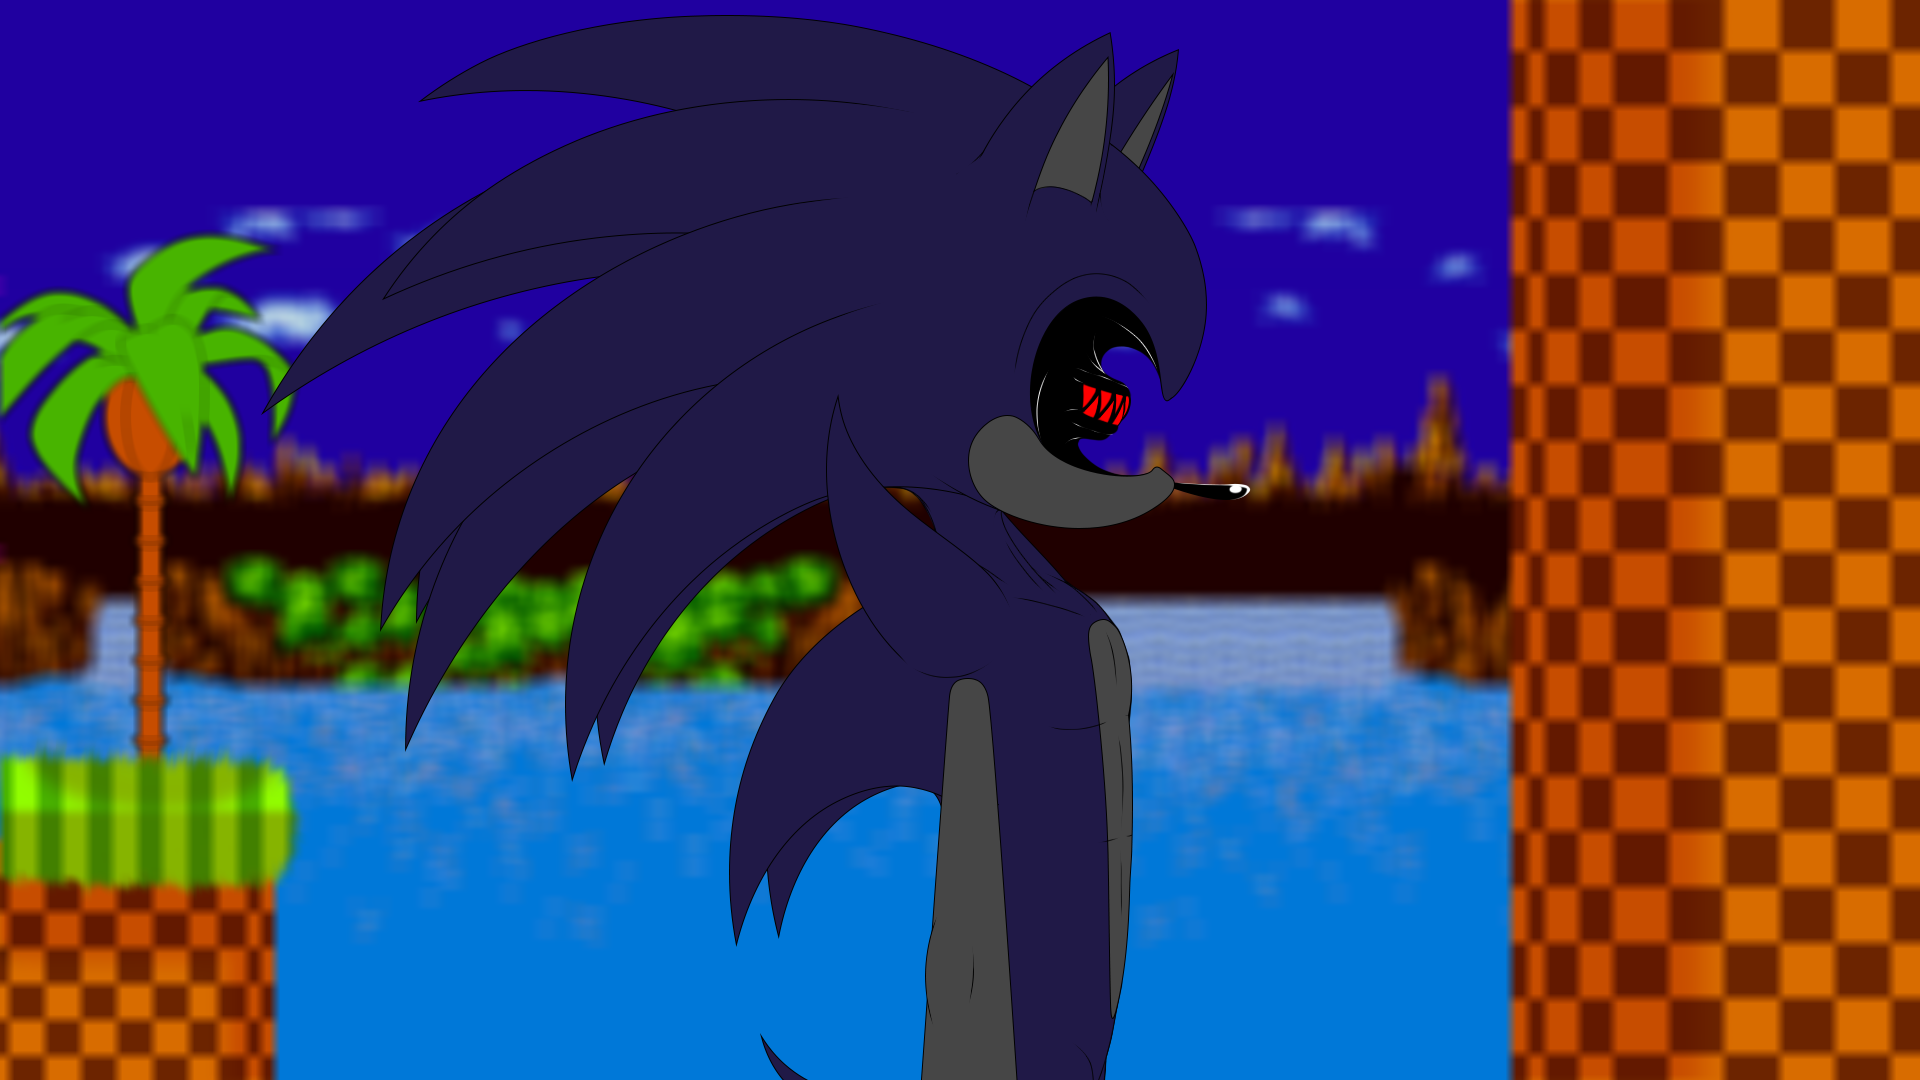 Sonic exe green hill zone edited by me by Pinkieisapartyanimal on